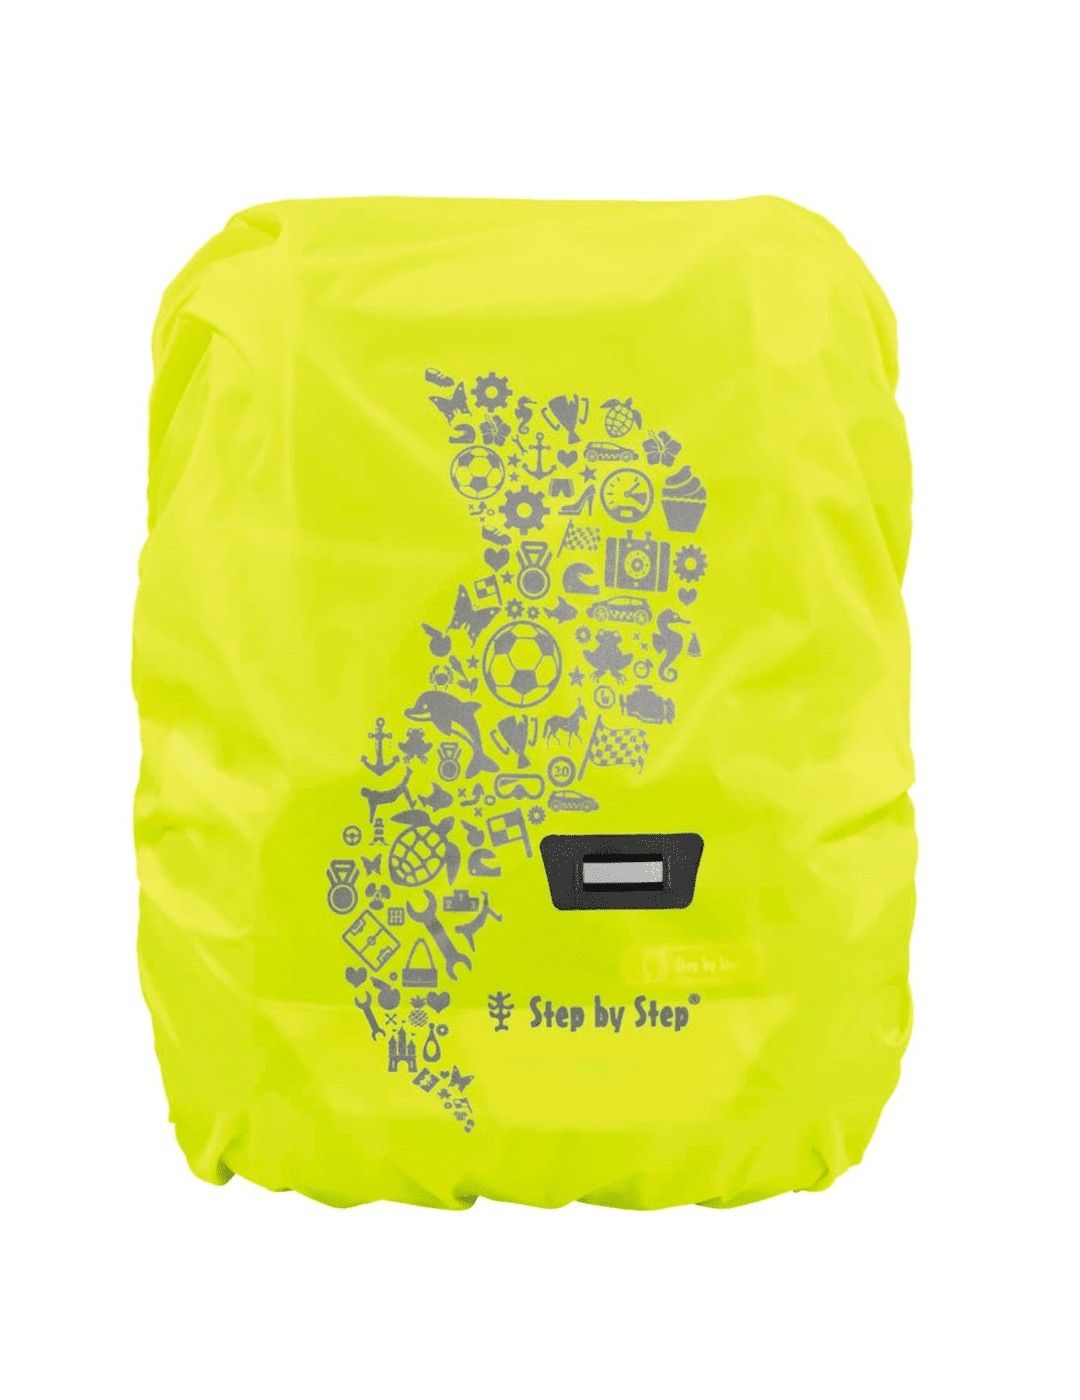 Step by step rain protection and safety cover for school counter yellow